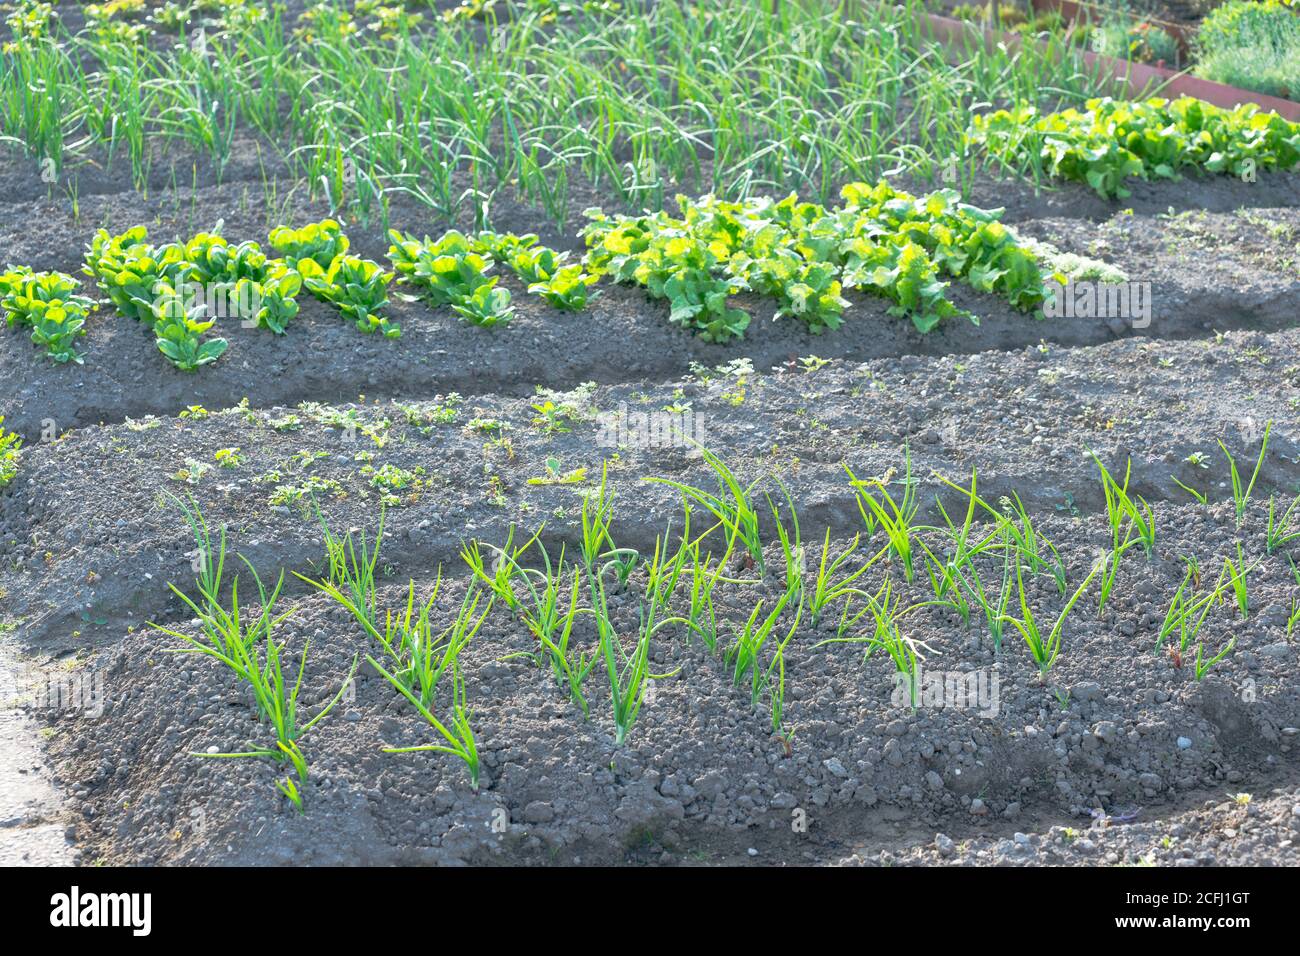 Fresh young scallions and spinach on a sunny vegetable garden patch with other vegetables in the background. With copy-space Stock Photo